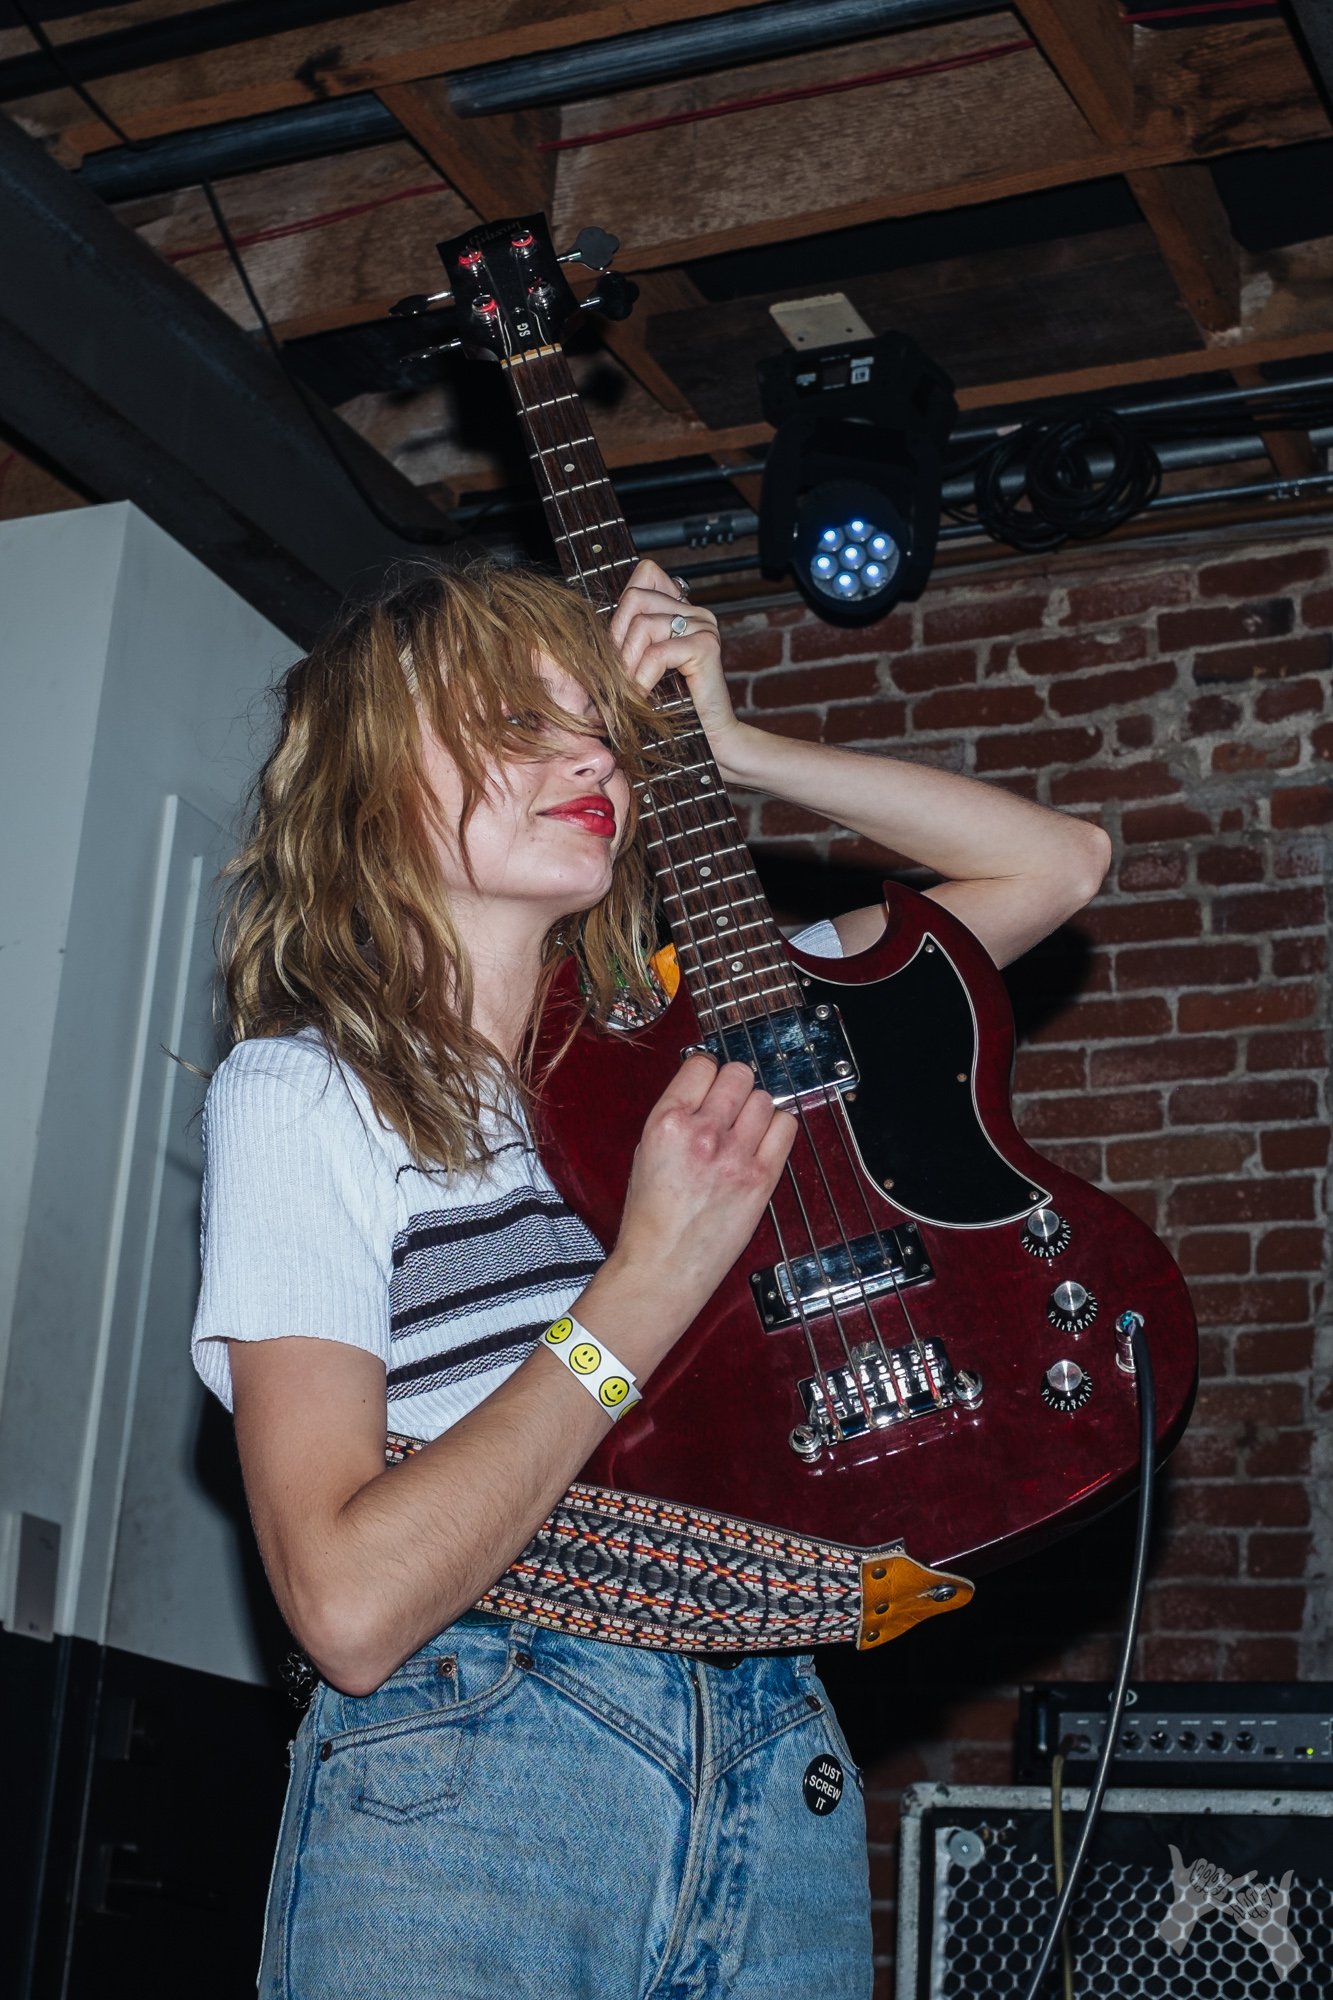 The Paranoyds at Resident Los Angeles